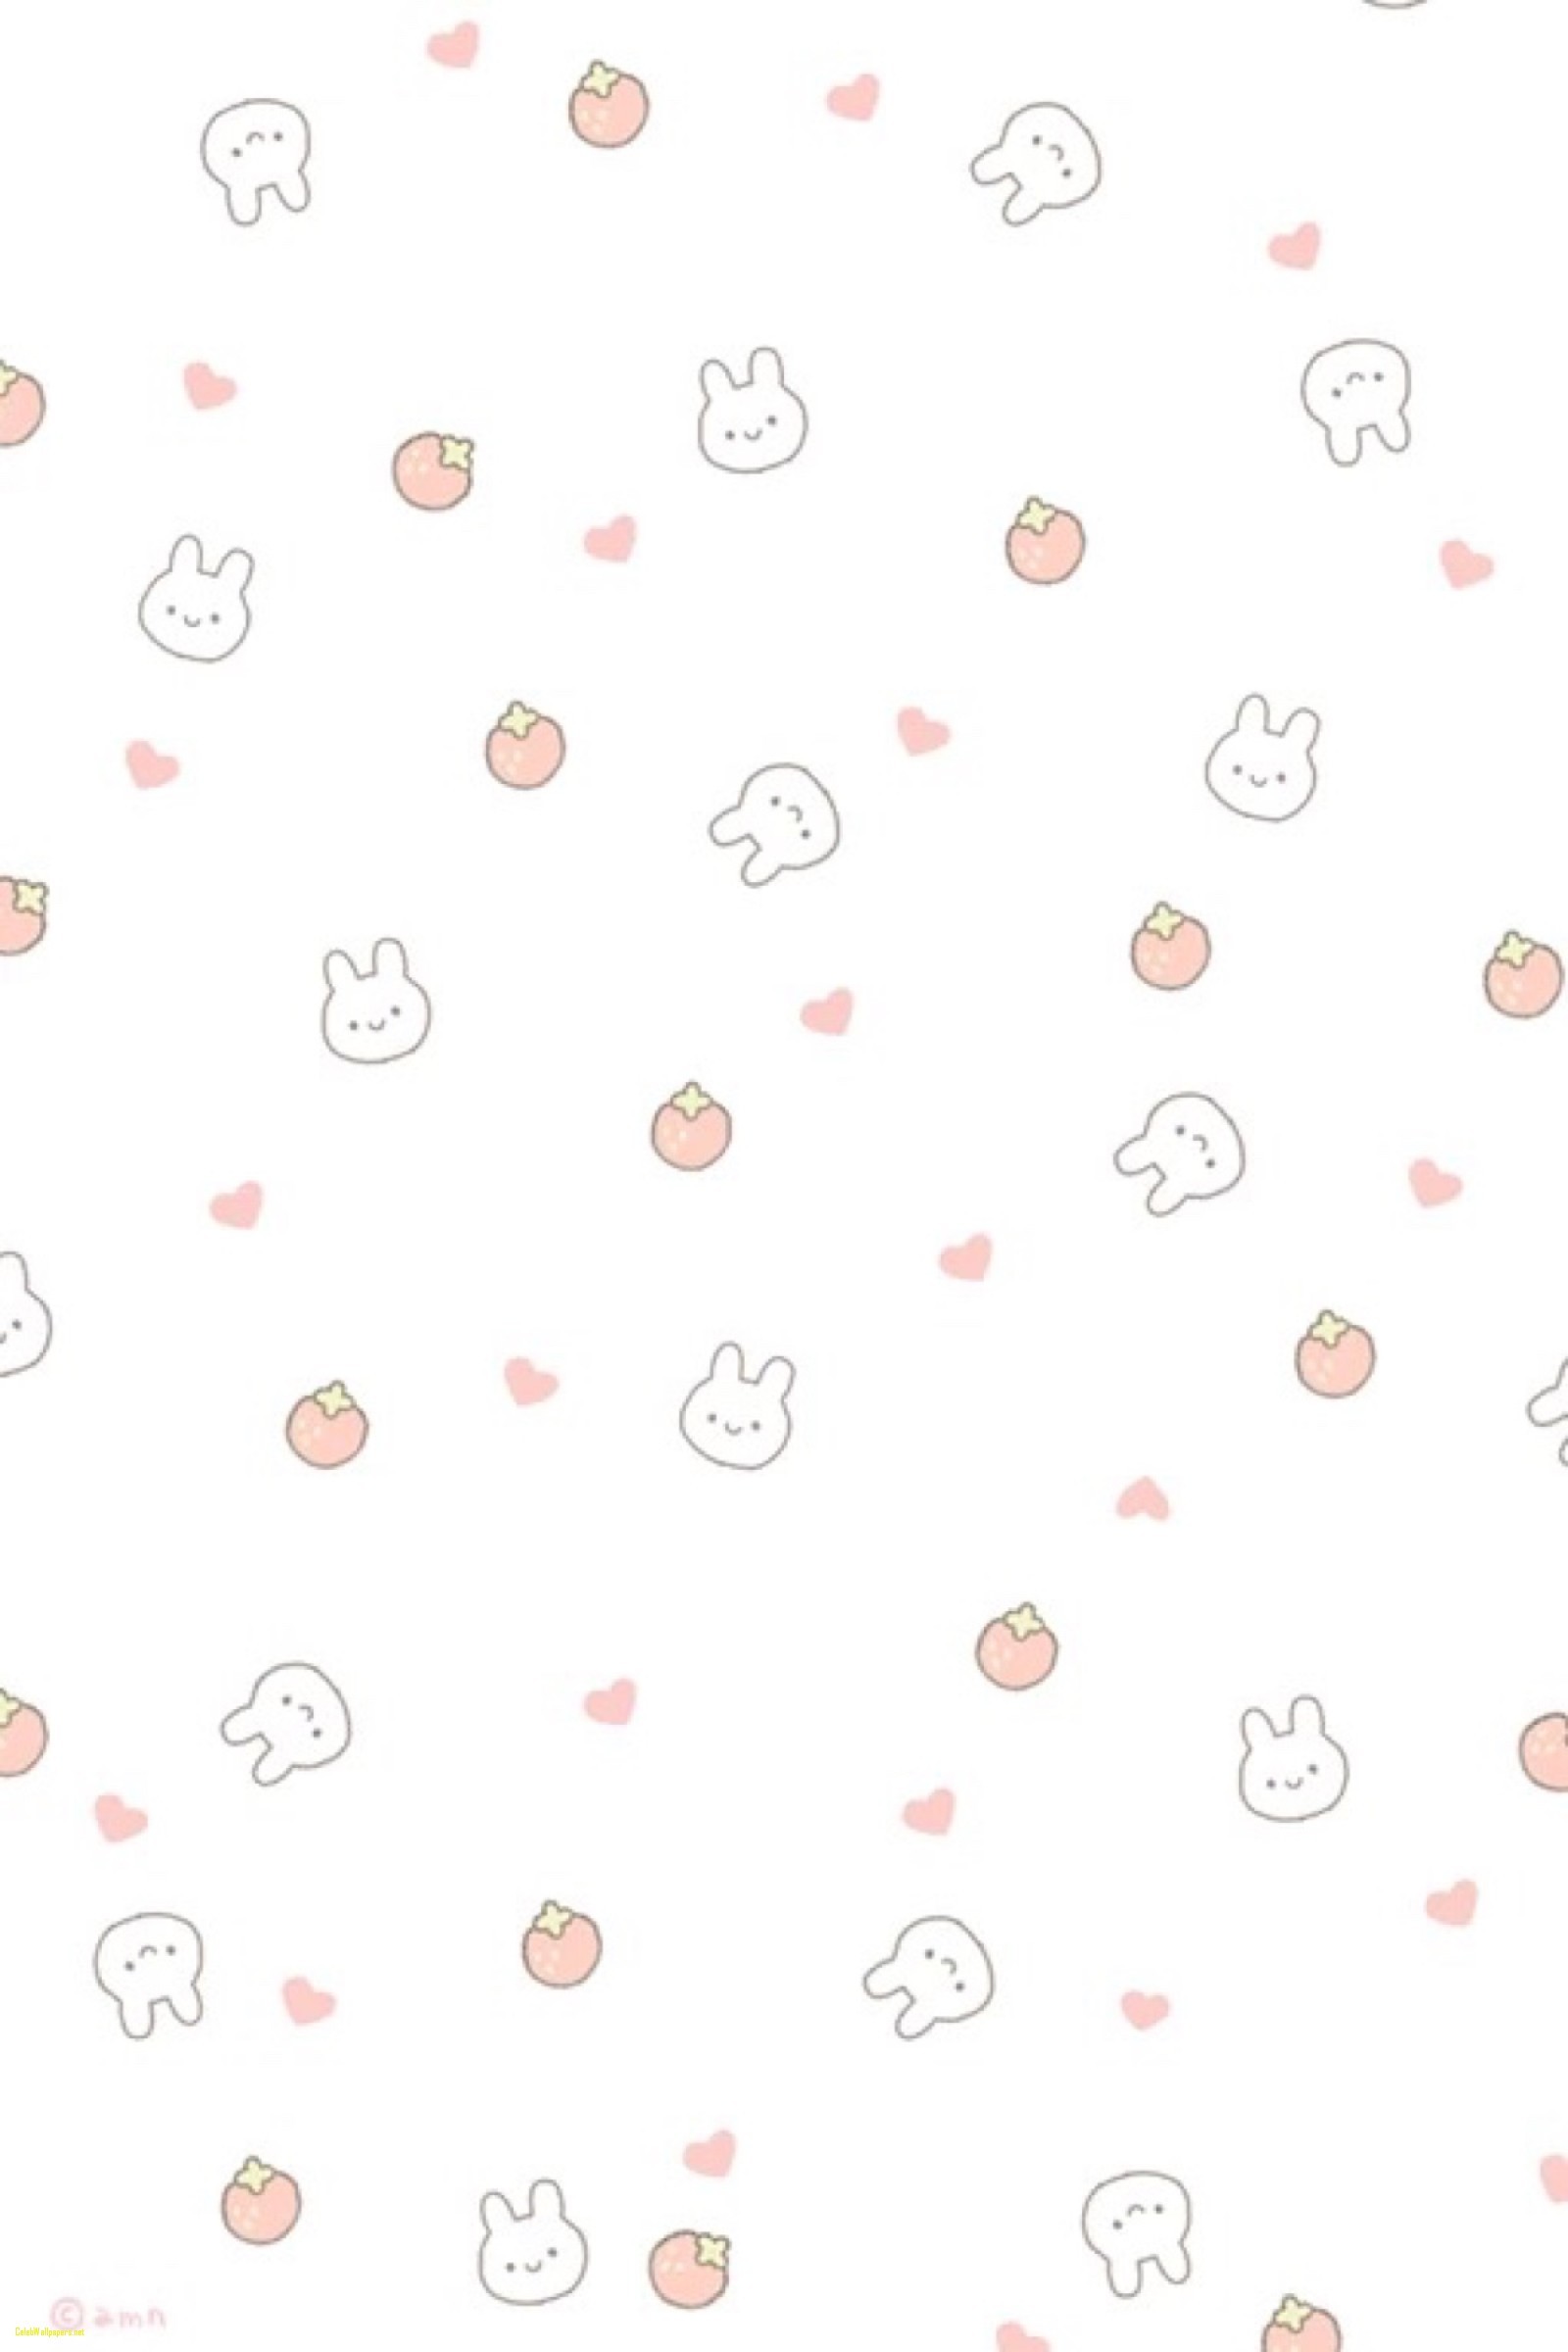 Cute Wallpapers for Phones (69+ images)